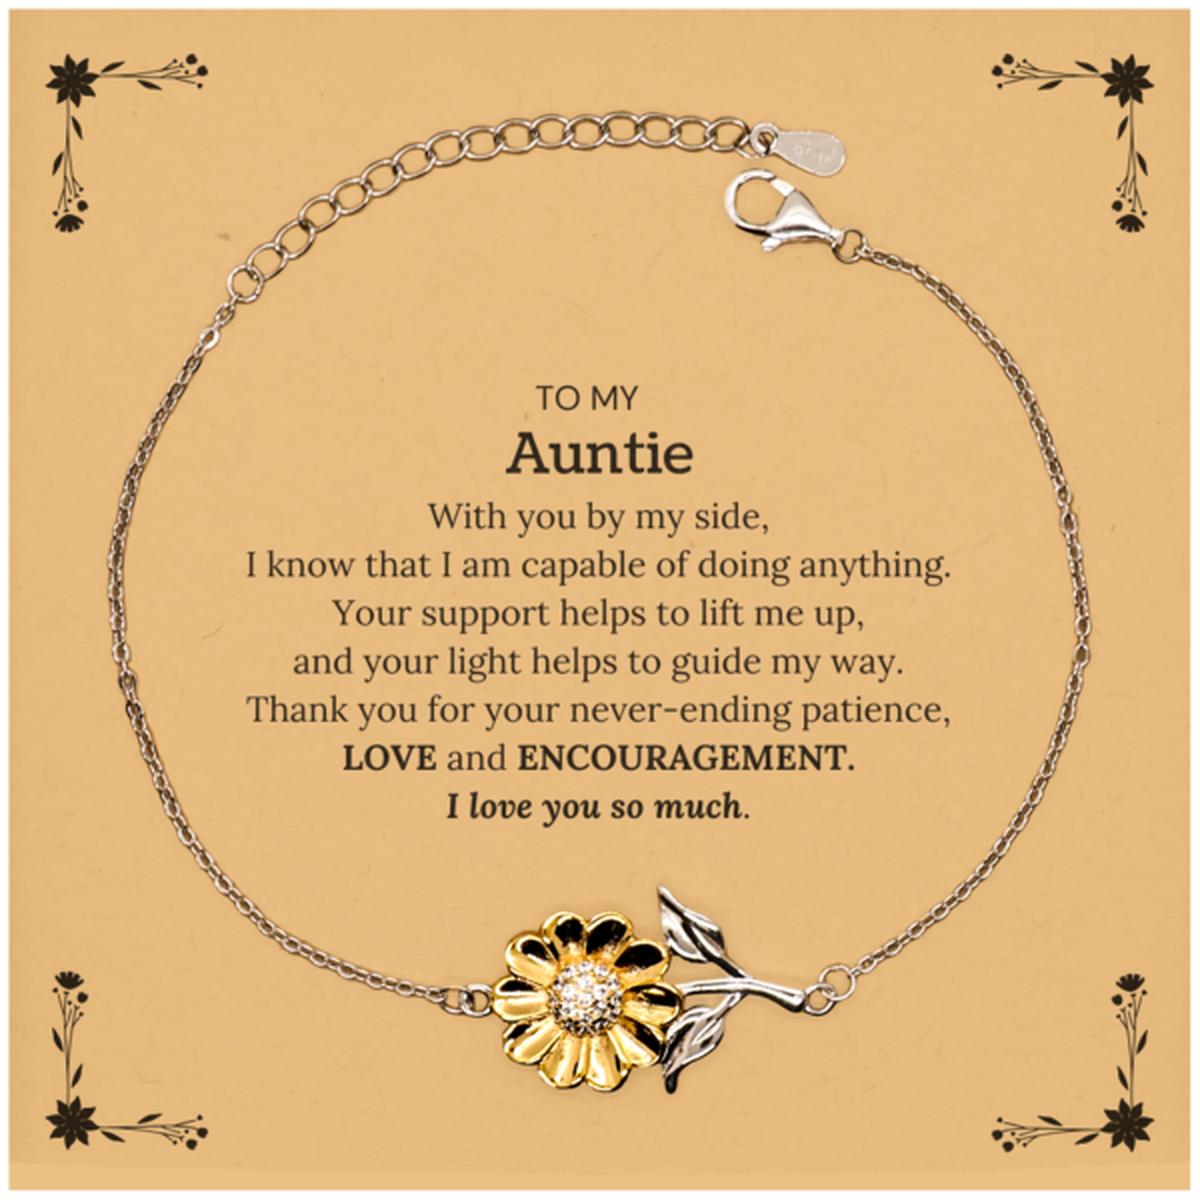 Appreciation Auntie Sunflower Bracelet Gifts, To My Auntie Birthday Christmas Wedding Keepsake Gifts for Auntie With you by my side, I know that I am capable of doing anything. I love you so much